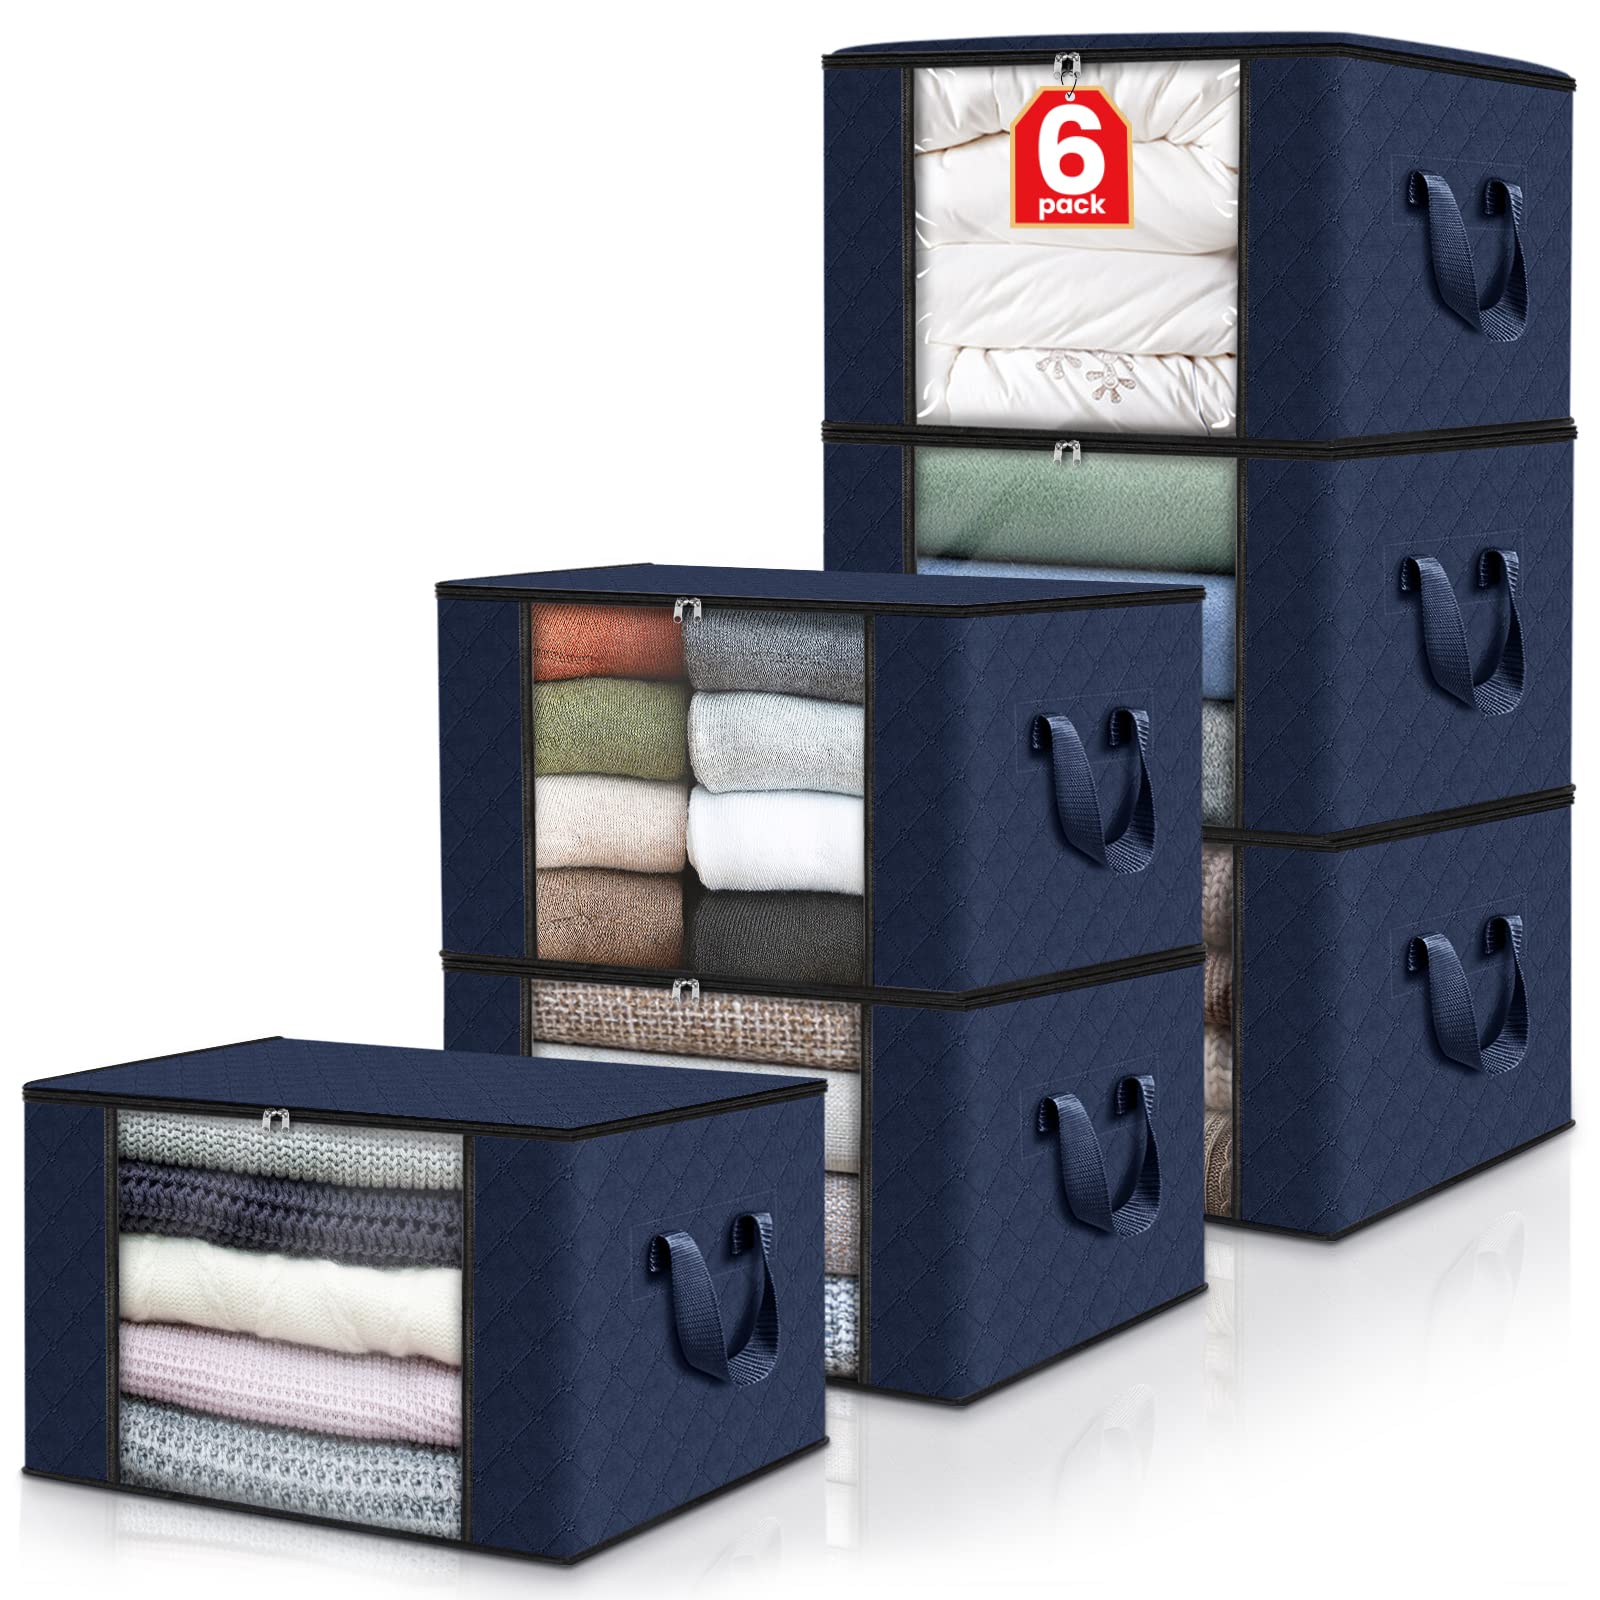 The BlissTotes Clothing Storage Bags Are 56% Off at Amazon